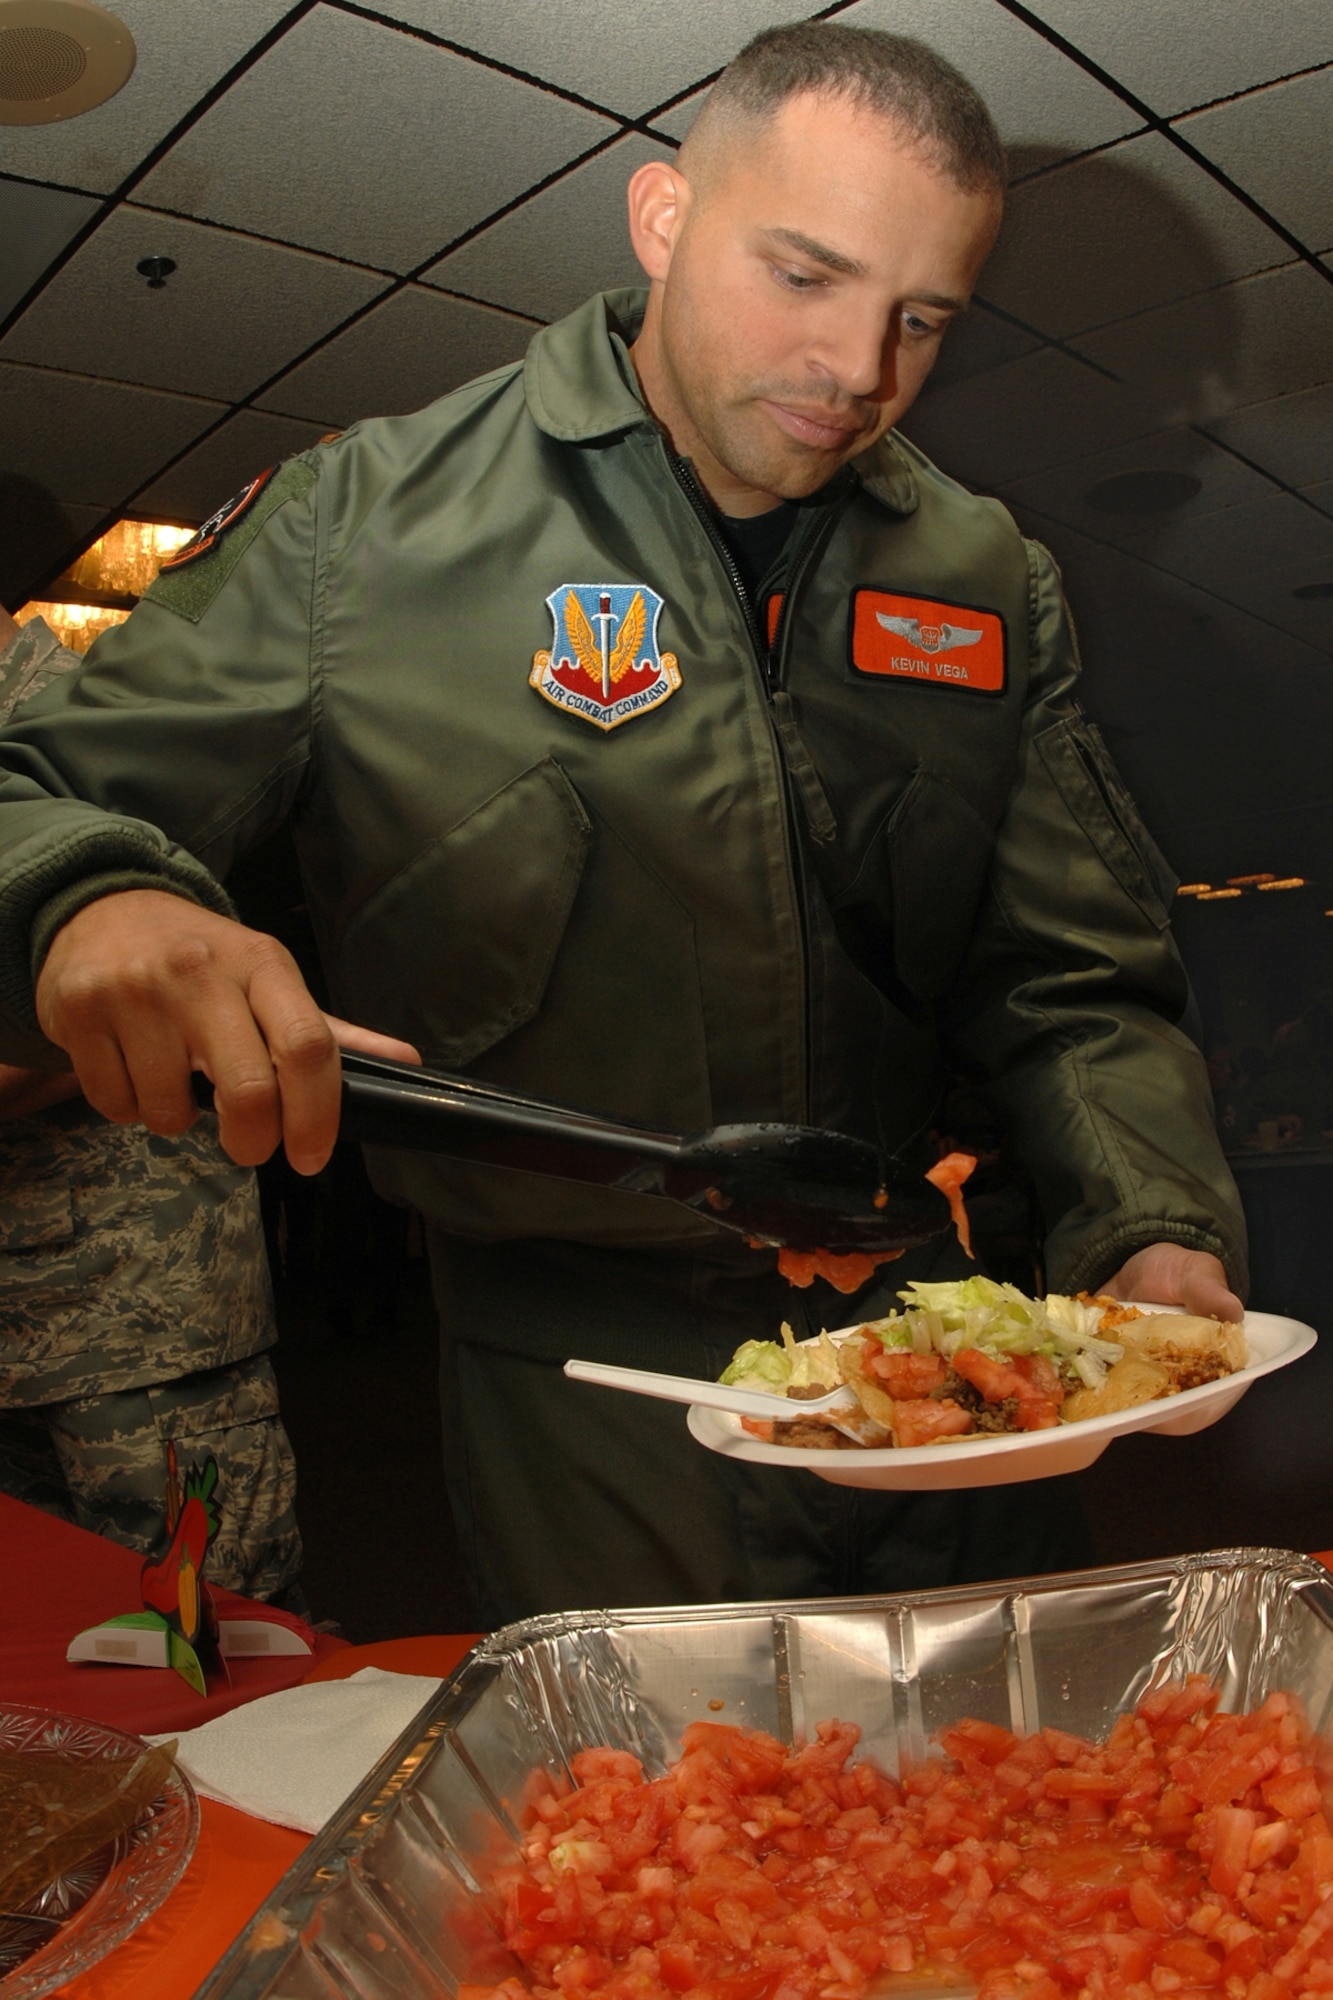 OFFUTT AIR FORCE, Neb. -- 2nd Lt. Kevin Vega, 338th Combat Training Squadron, adds tomatoes for a taco during the annual Hispanic American Heritage Month food tasting at the Offutt AFB Community Center Oct. 1. Hispanic American Heritage Month began Sept. 15 and ends Oct. 15. (U.S. Air Force Photo By Charles Haymond)